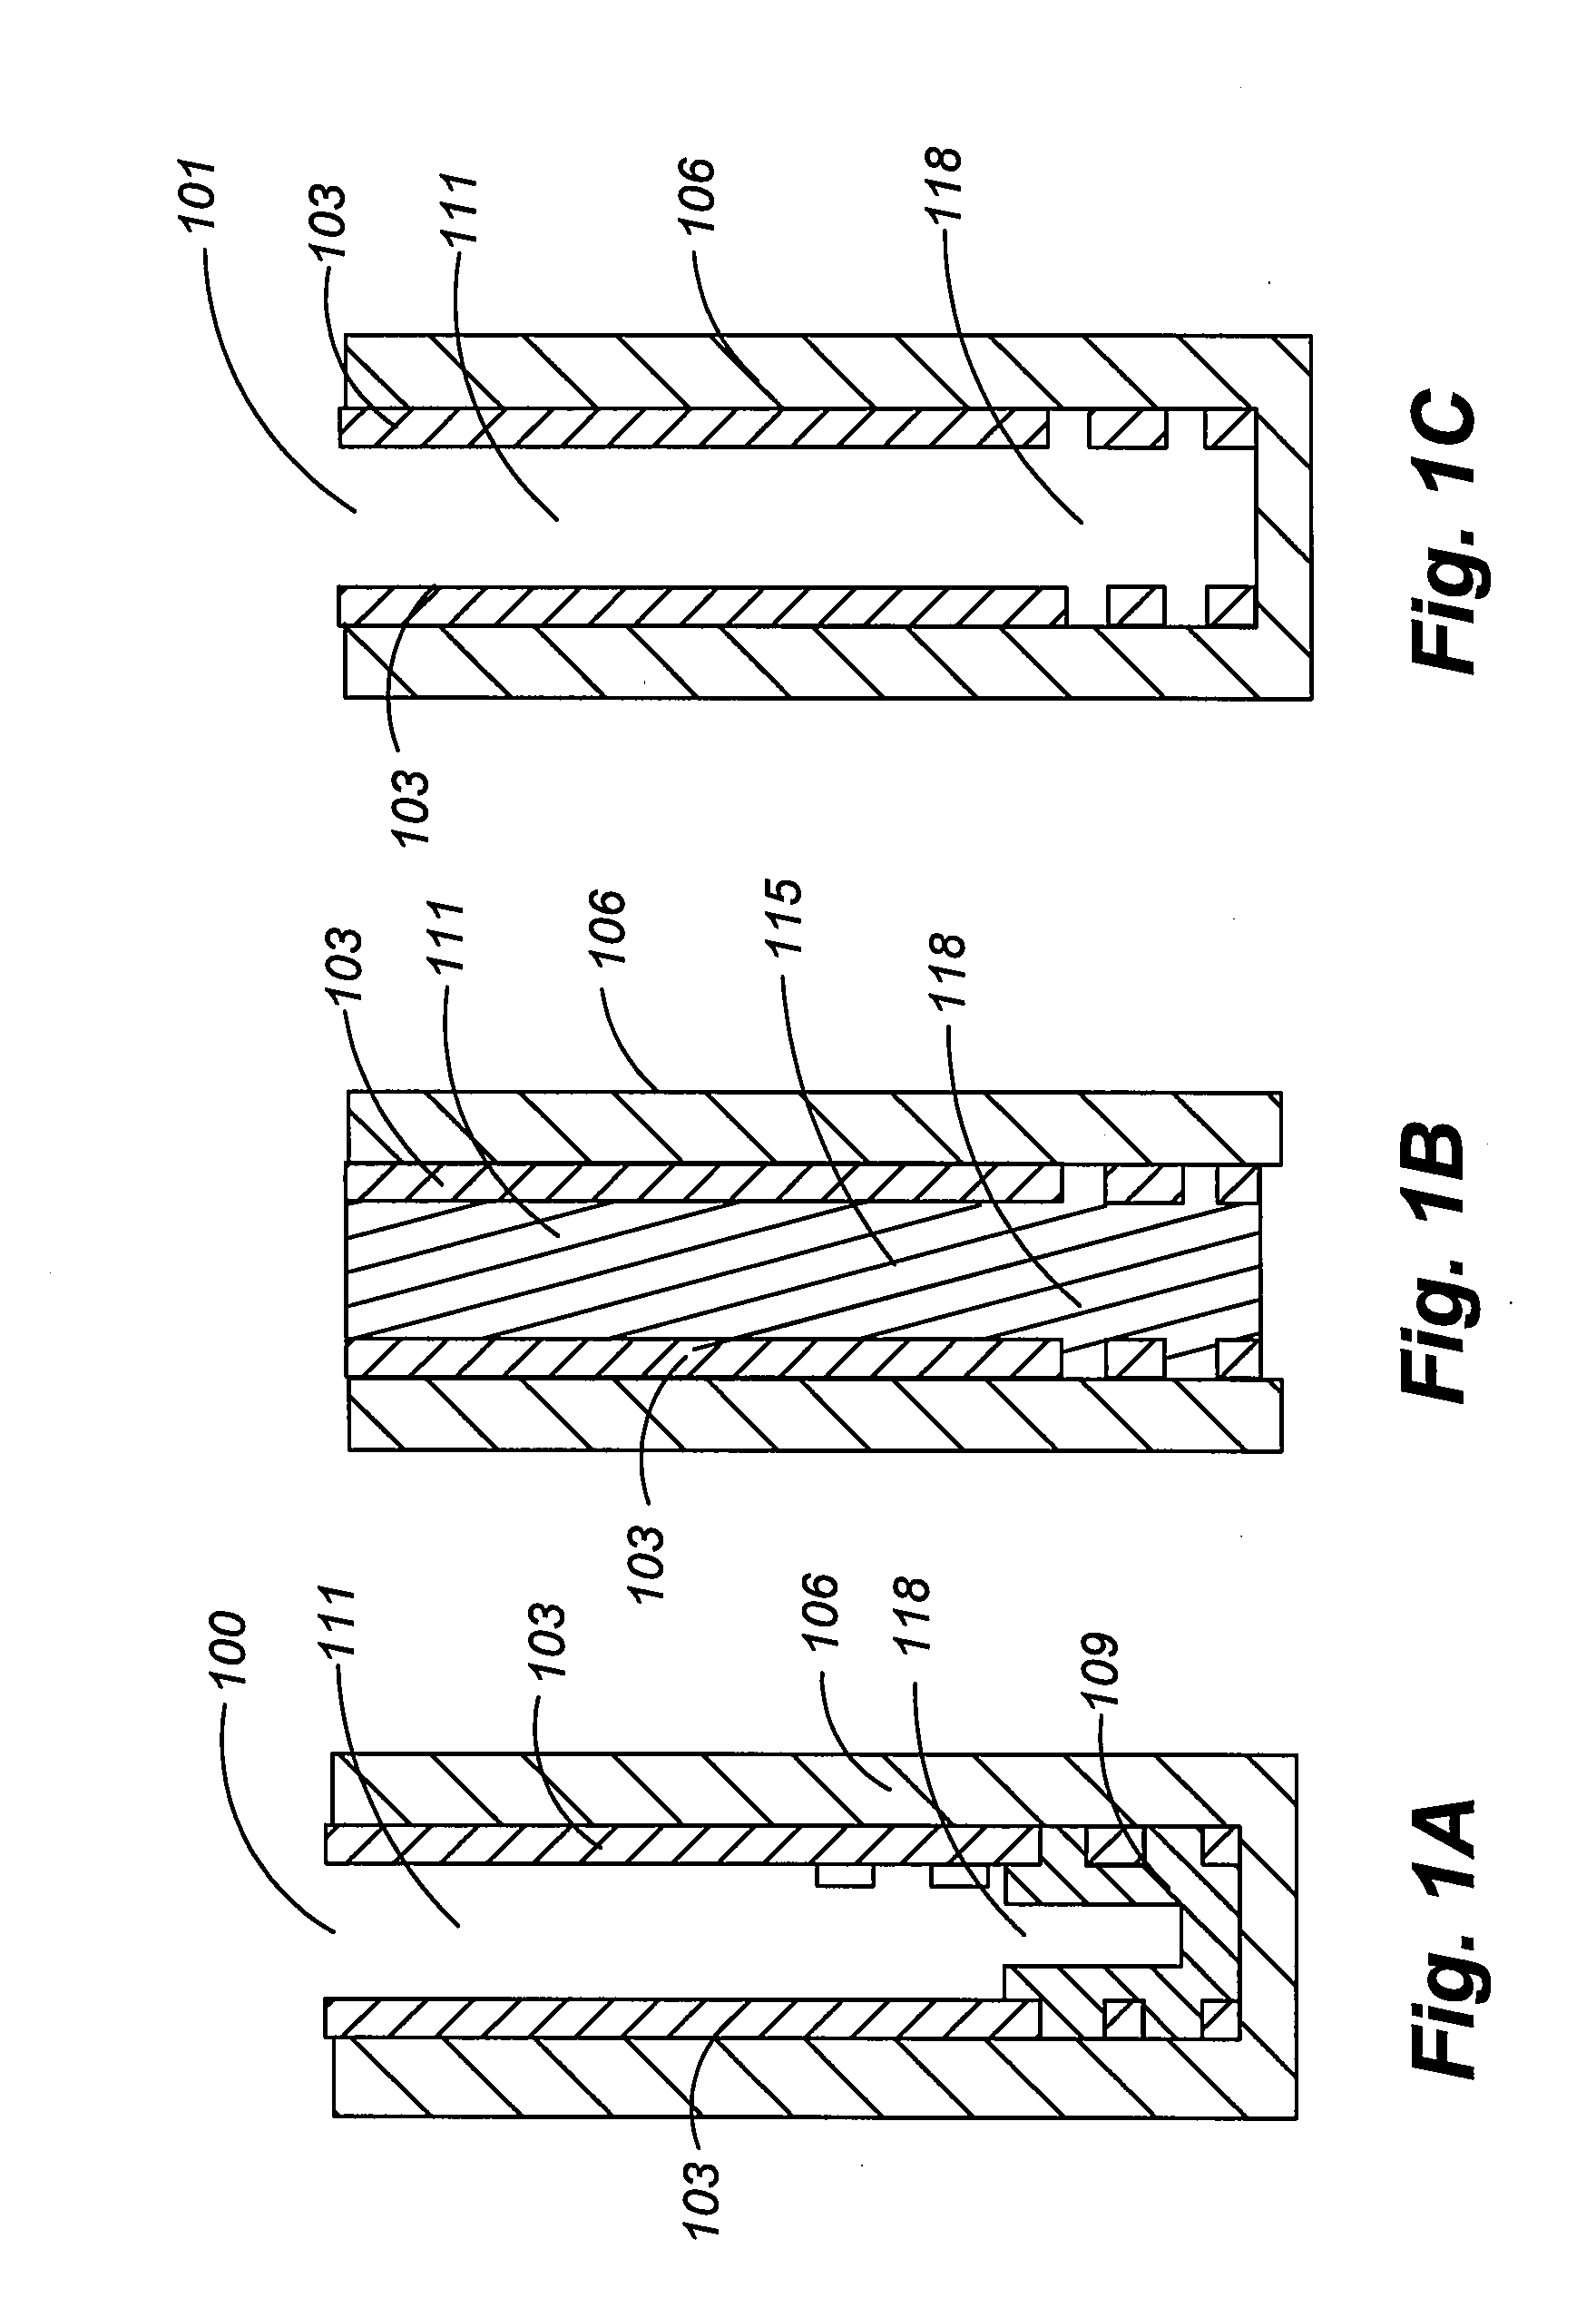 Composition comprising peroxygen and surfactant compounds and method of using the same